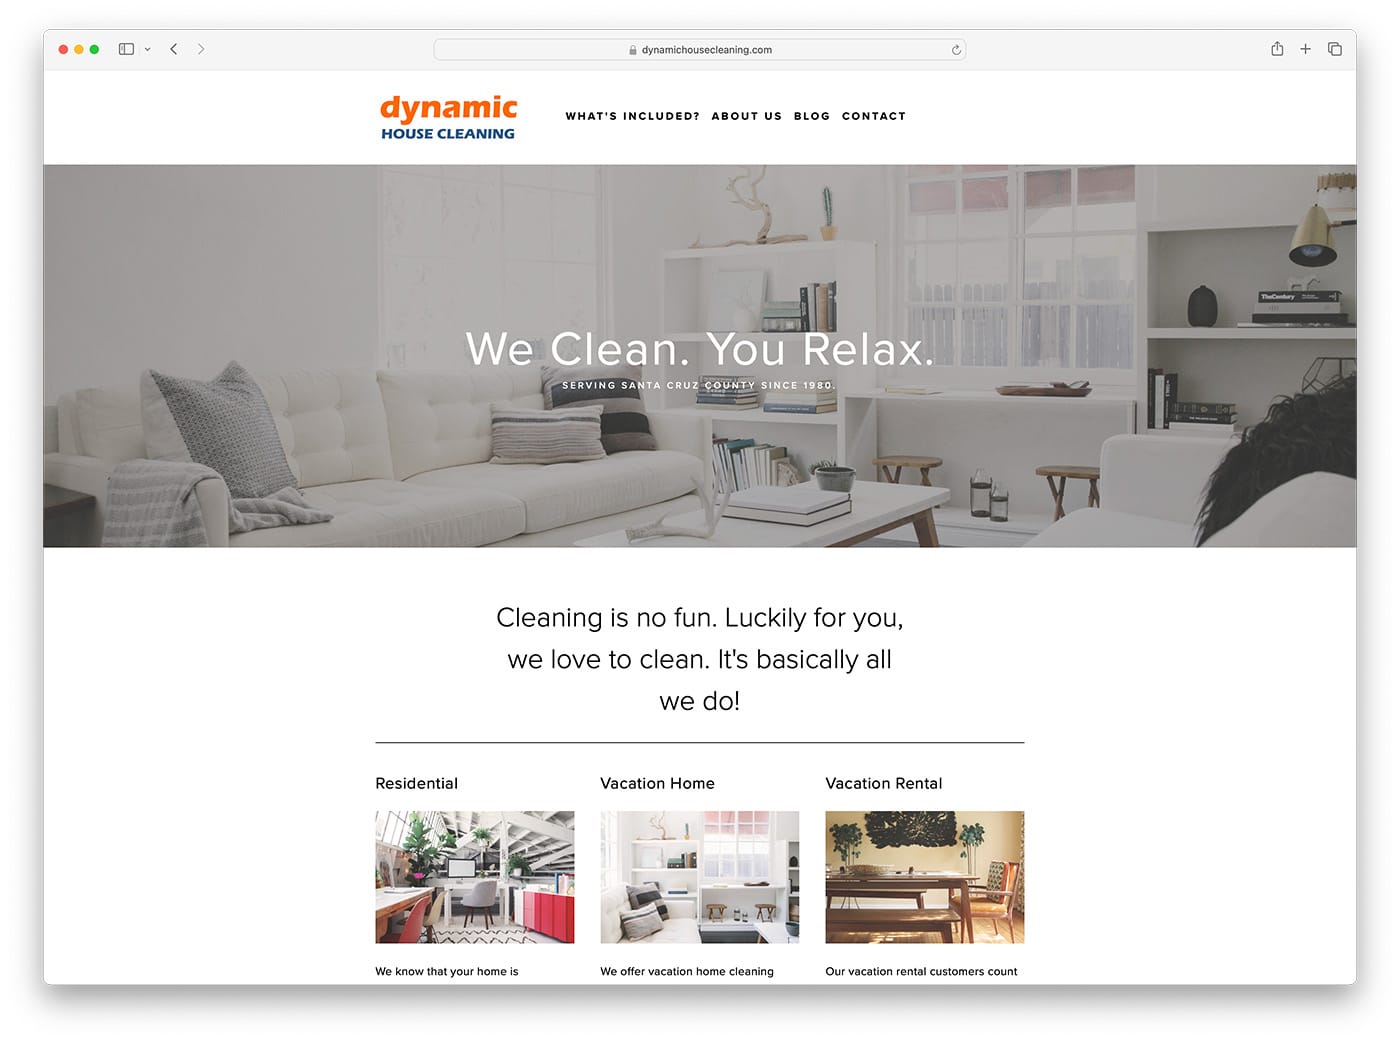 dynamic house cleaning services company